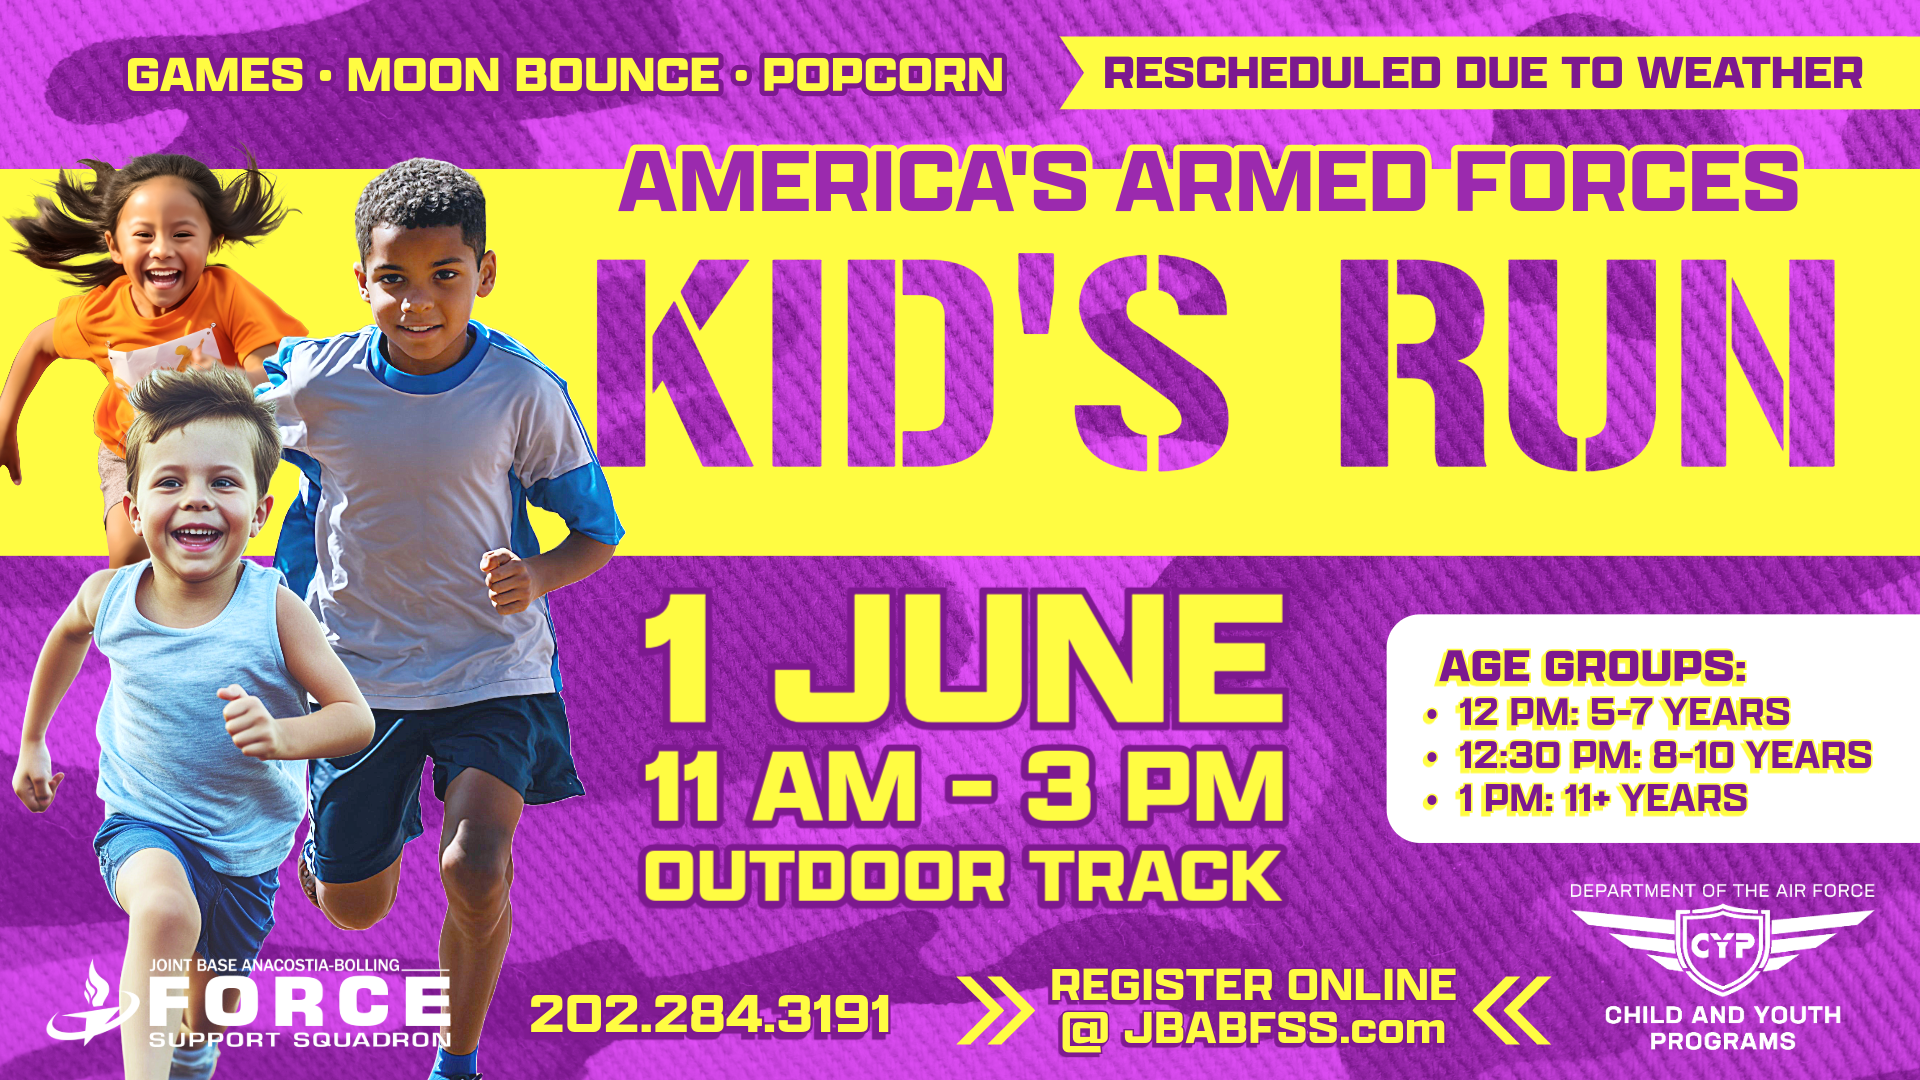 America’s Armed Forces Kids Run Registration for Ages 5-7